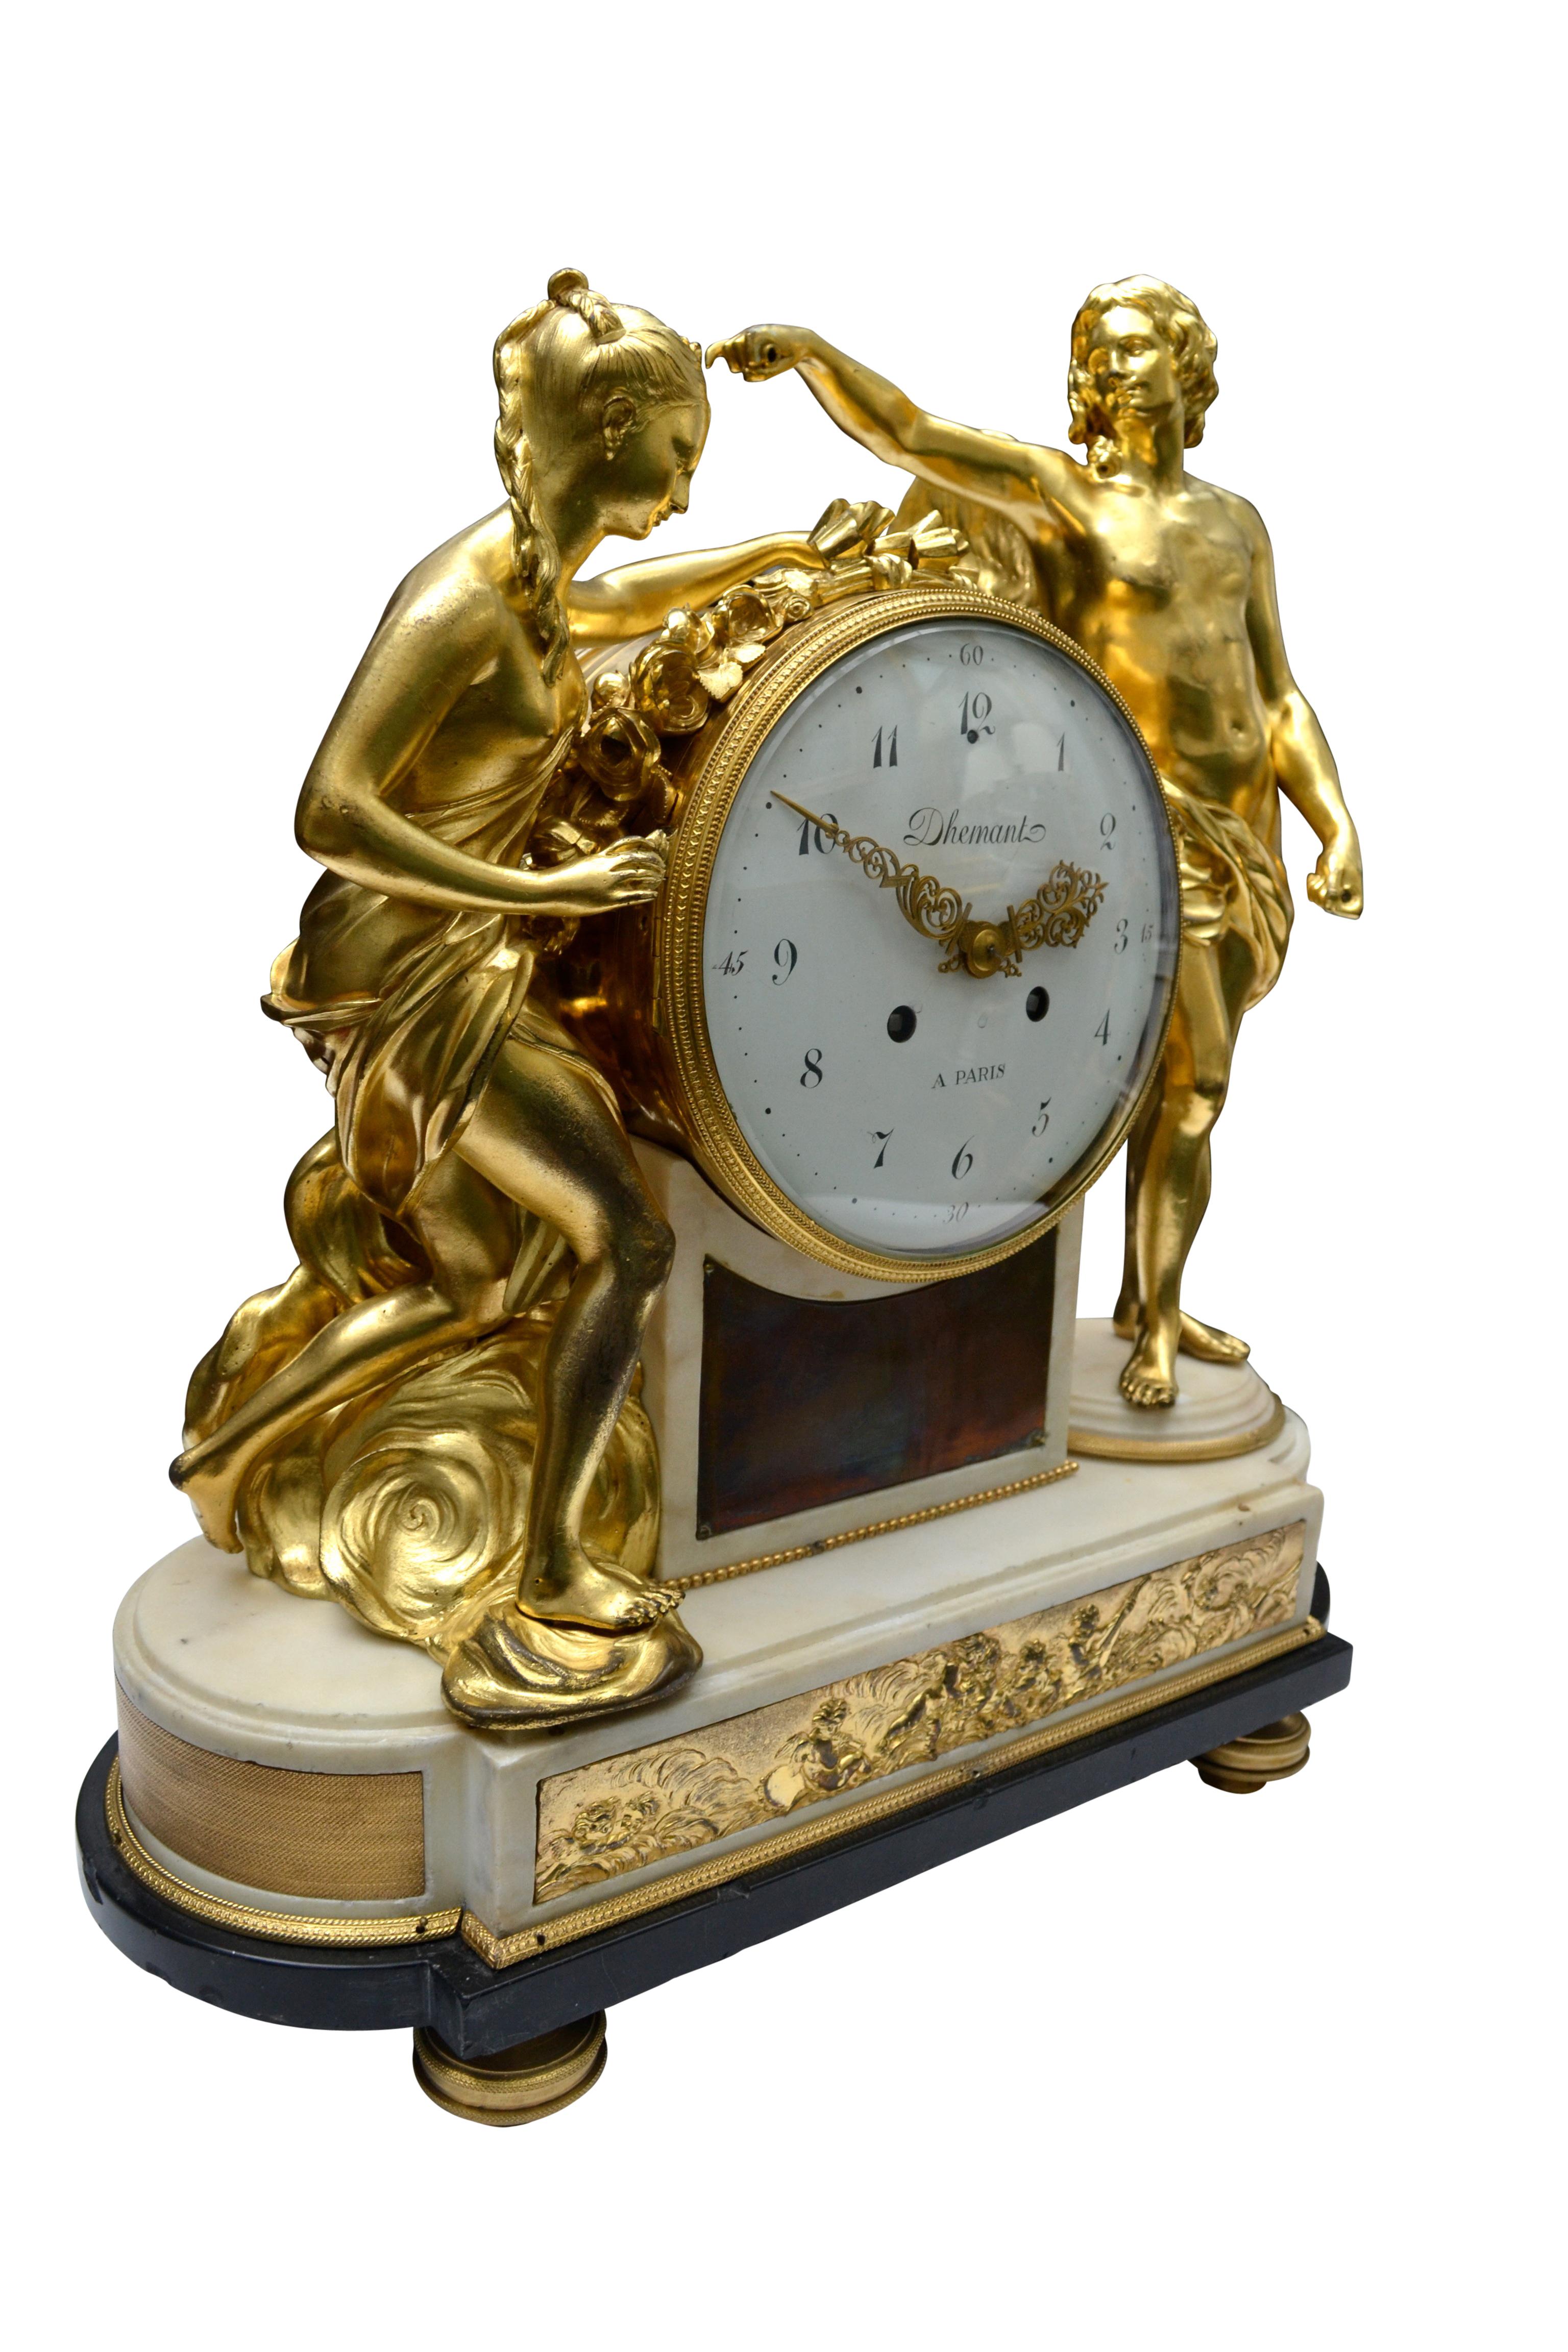 A fine and rare model of a period Louis XVI white marble and gilt bronze mantel (fireplace) clock, the dial signed Dhemant A Paris. The clock features two large gilded classically draped bronze figures standing on either side of the large white